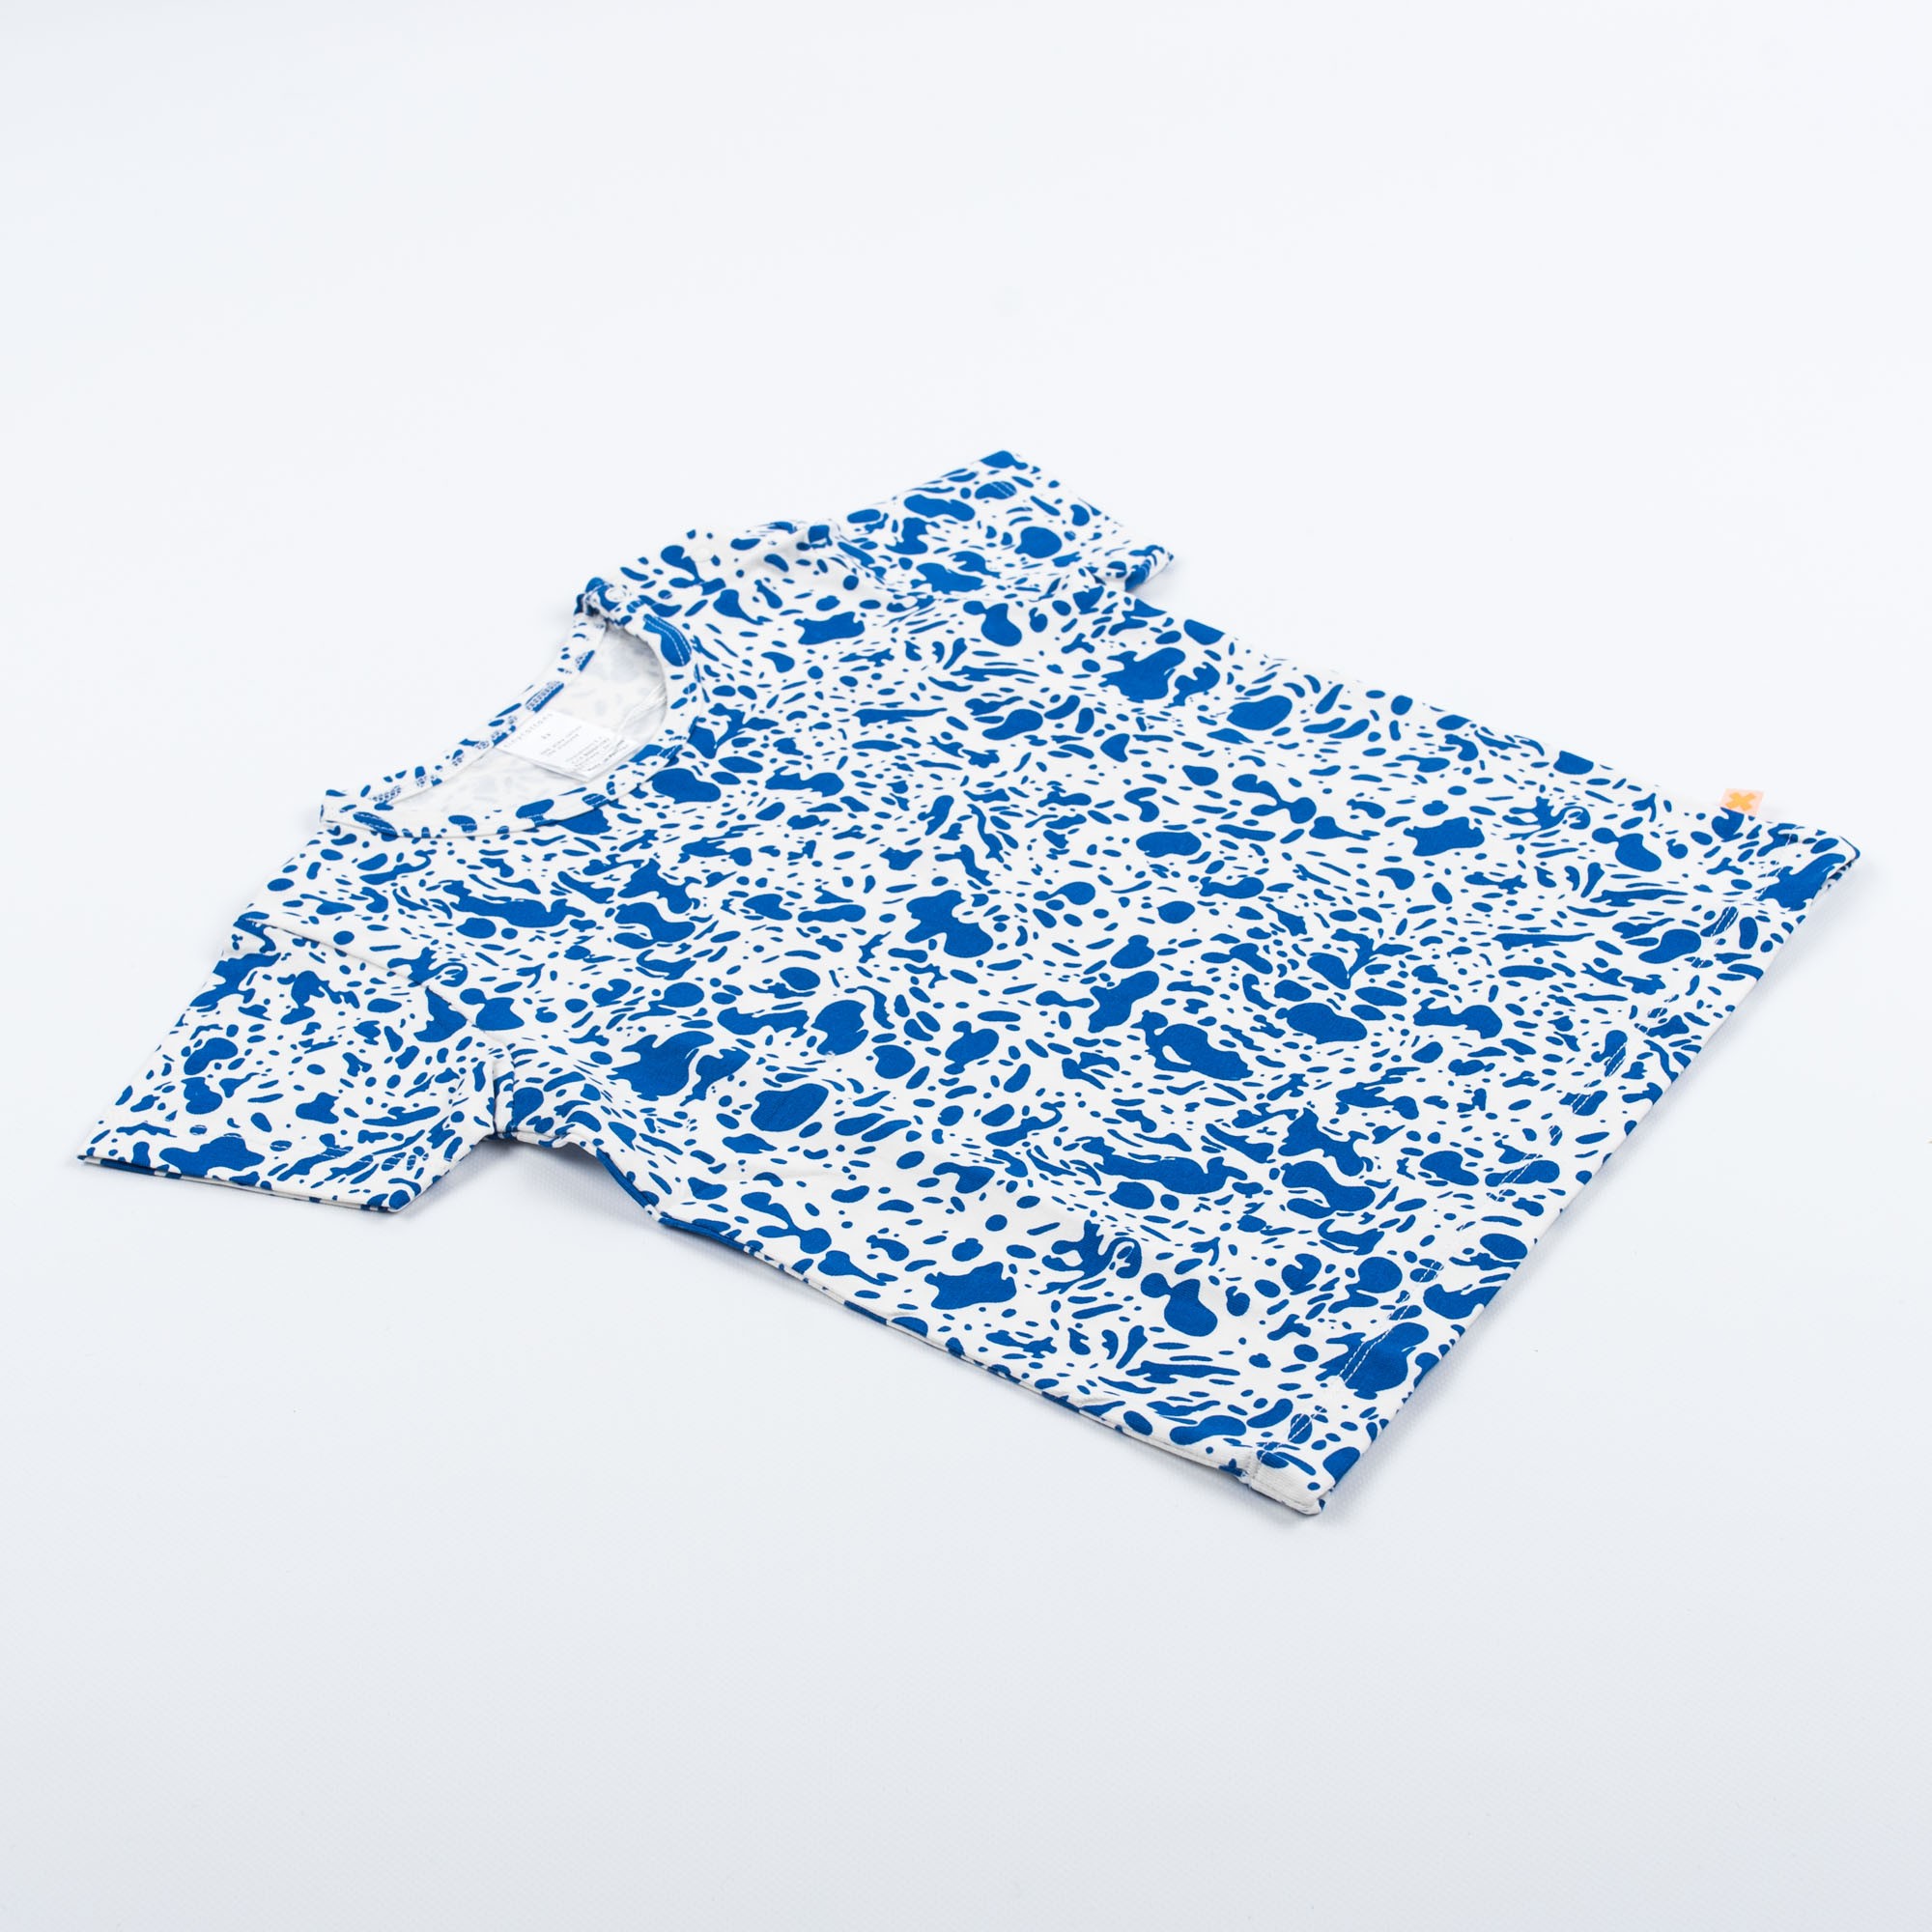 Tinycottons Off-White T-Shirt with Blue Speckles | littlehipstar.com